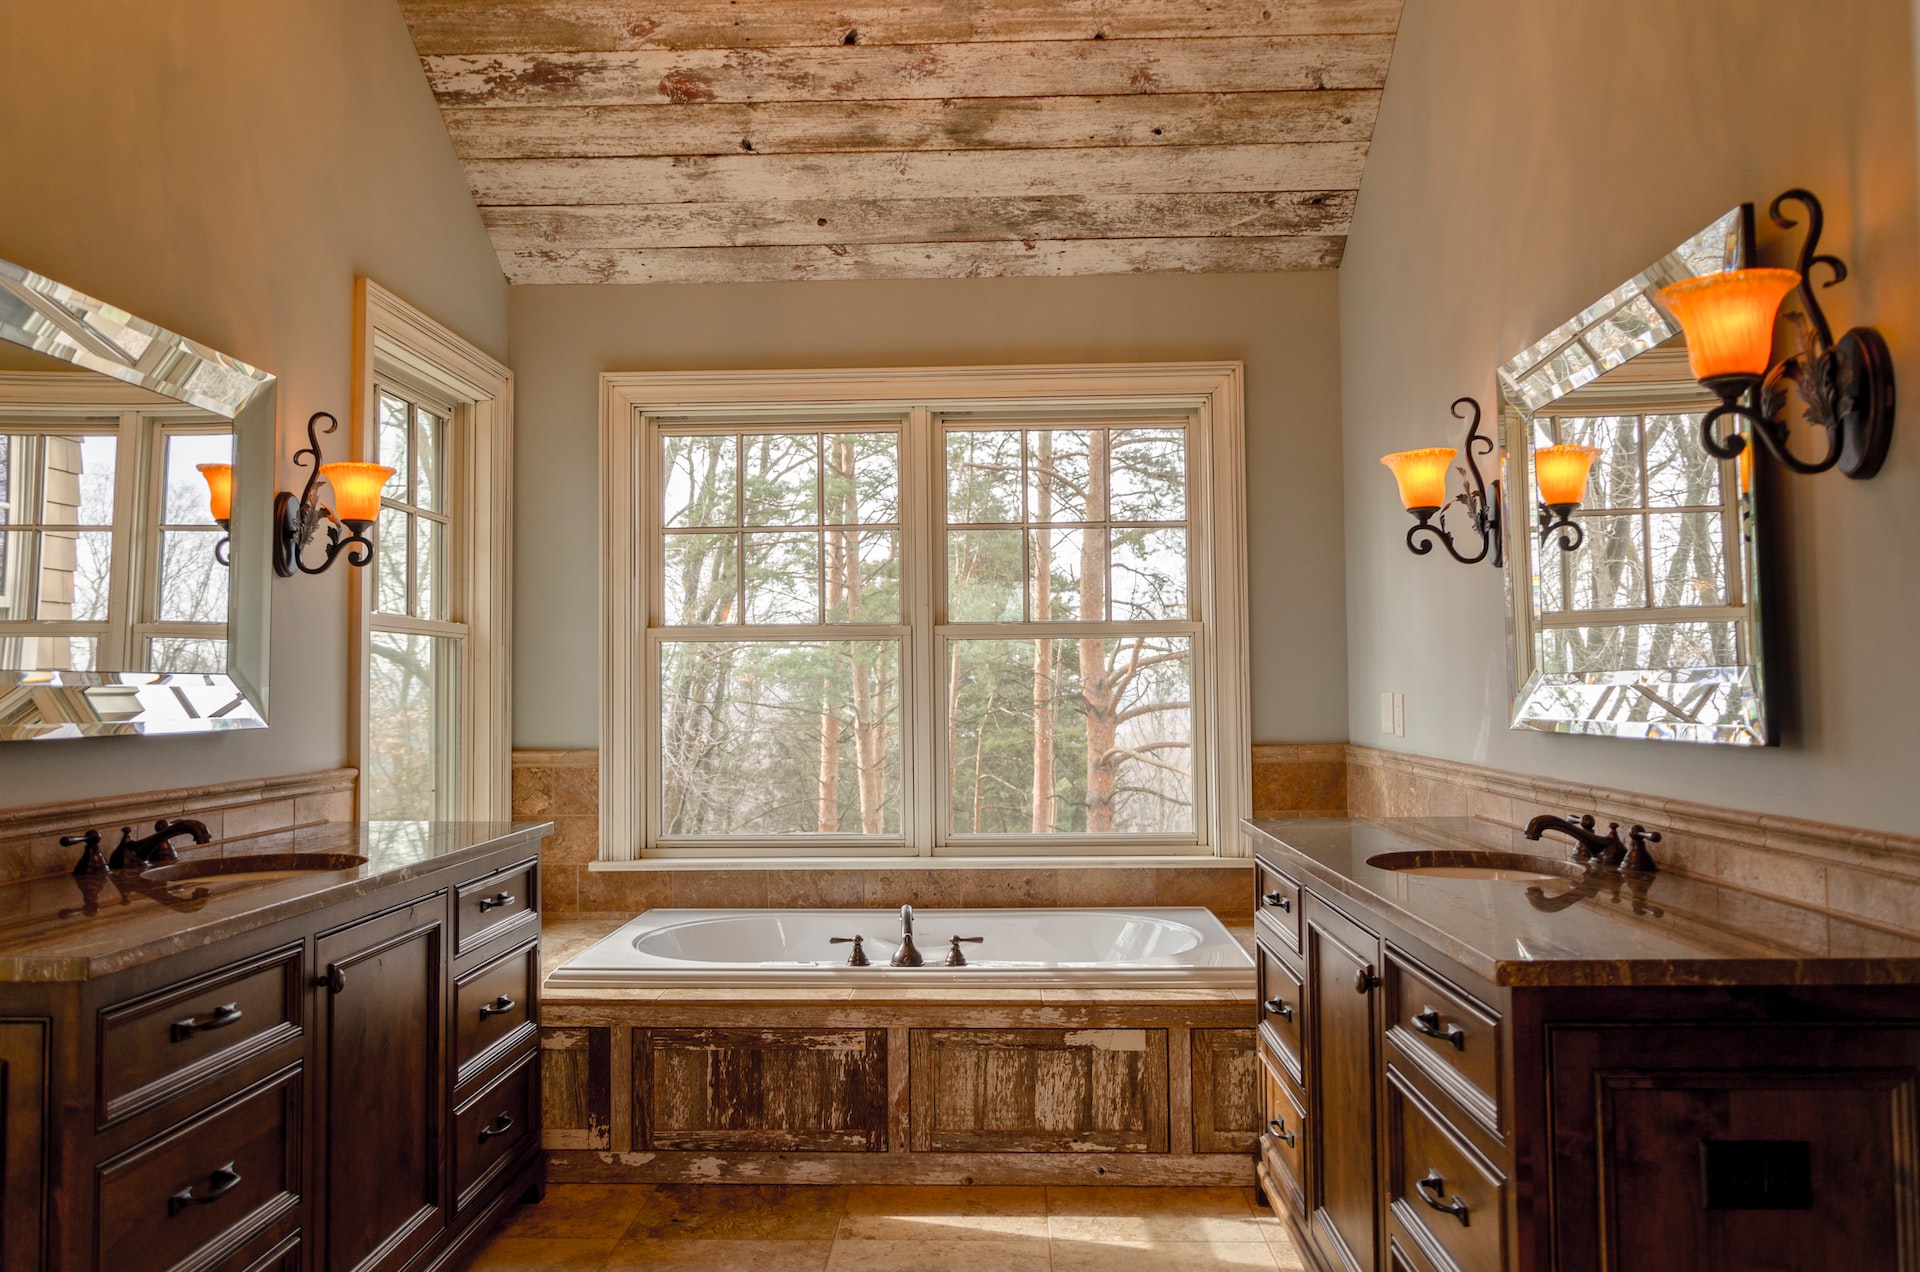 A bathroom of a home in the woods.